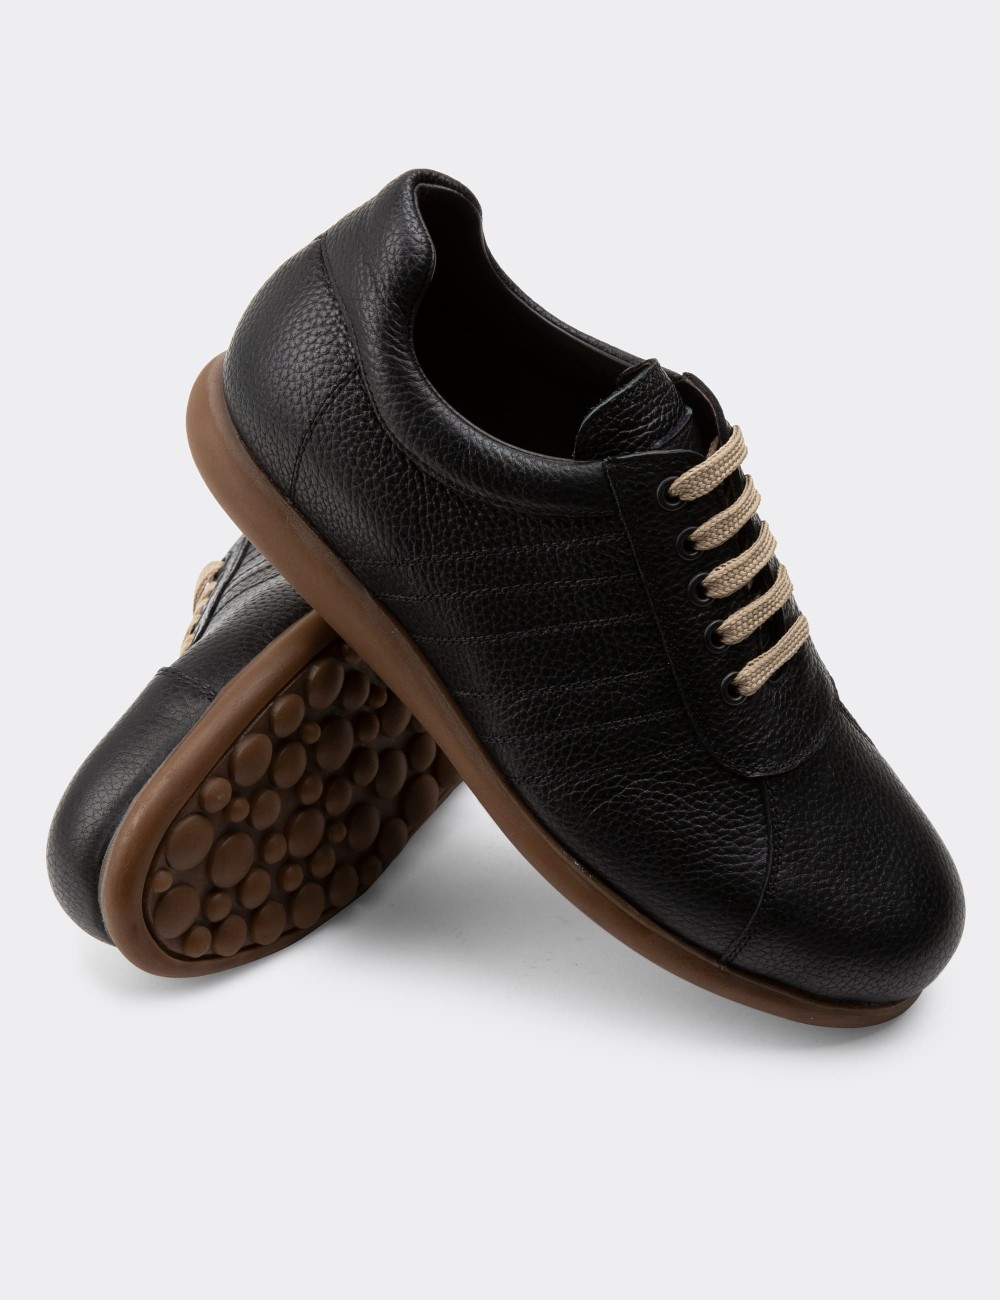 Black Leather Lace-up Shoes - 01826MSYHC05